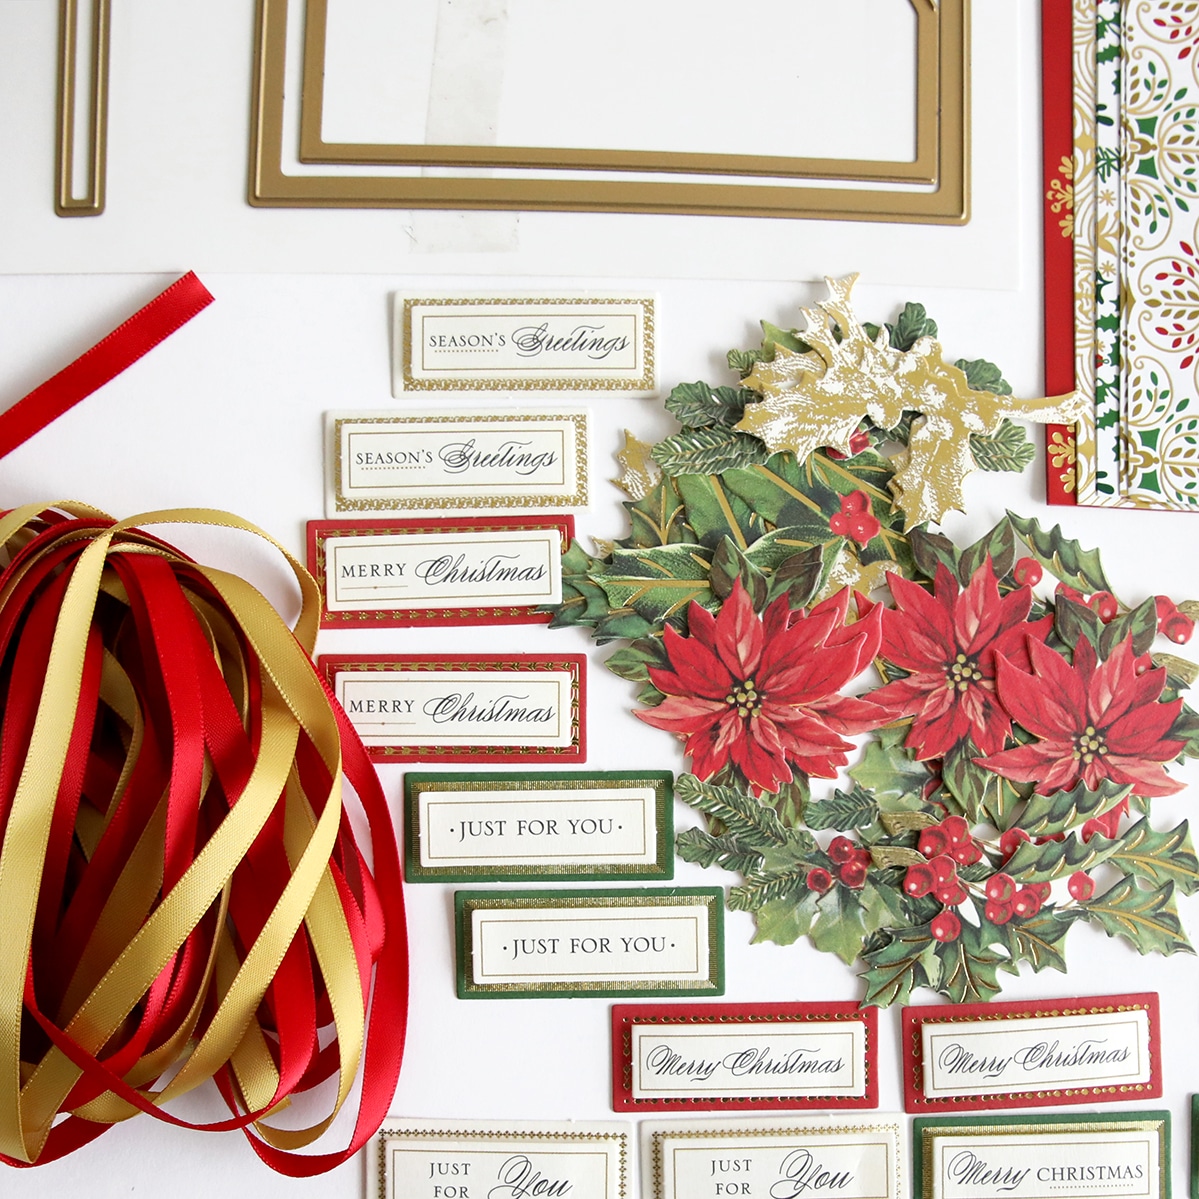 A collection of christmas decorations and ribbons on a table.